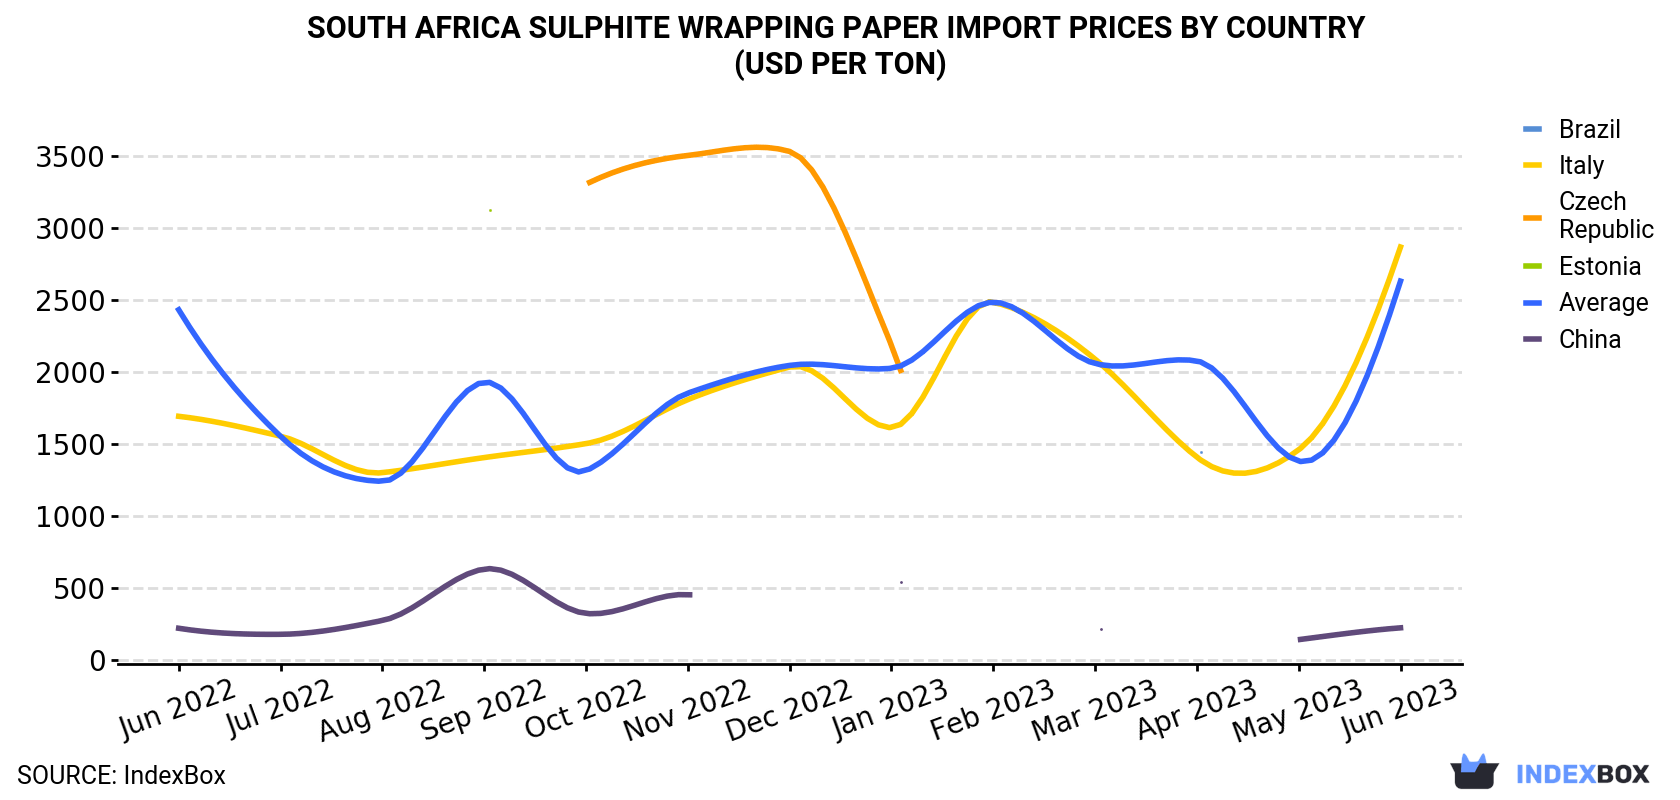 South Africa Sulphite Wrapping Paper Import Prices By Country (USD Per Ton)